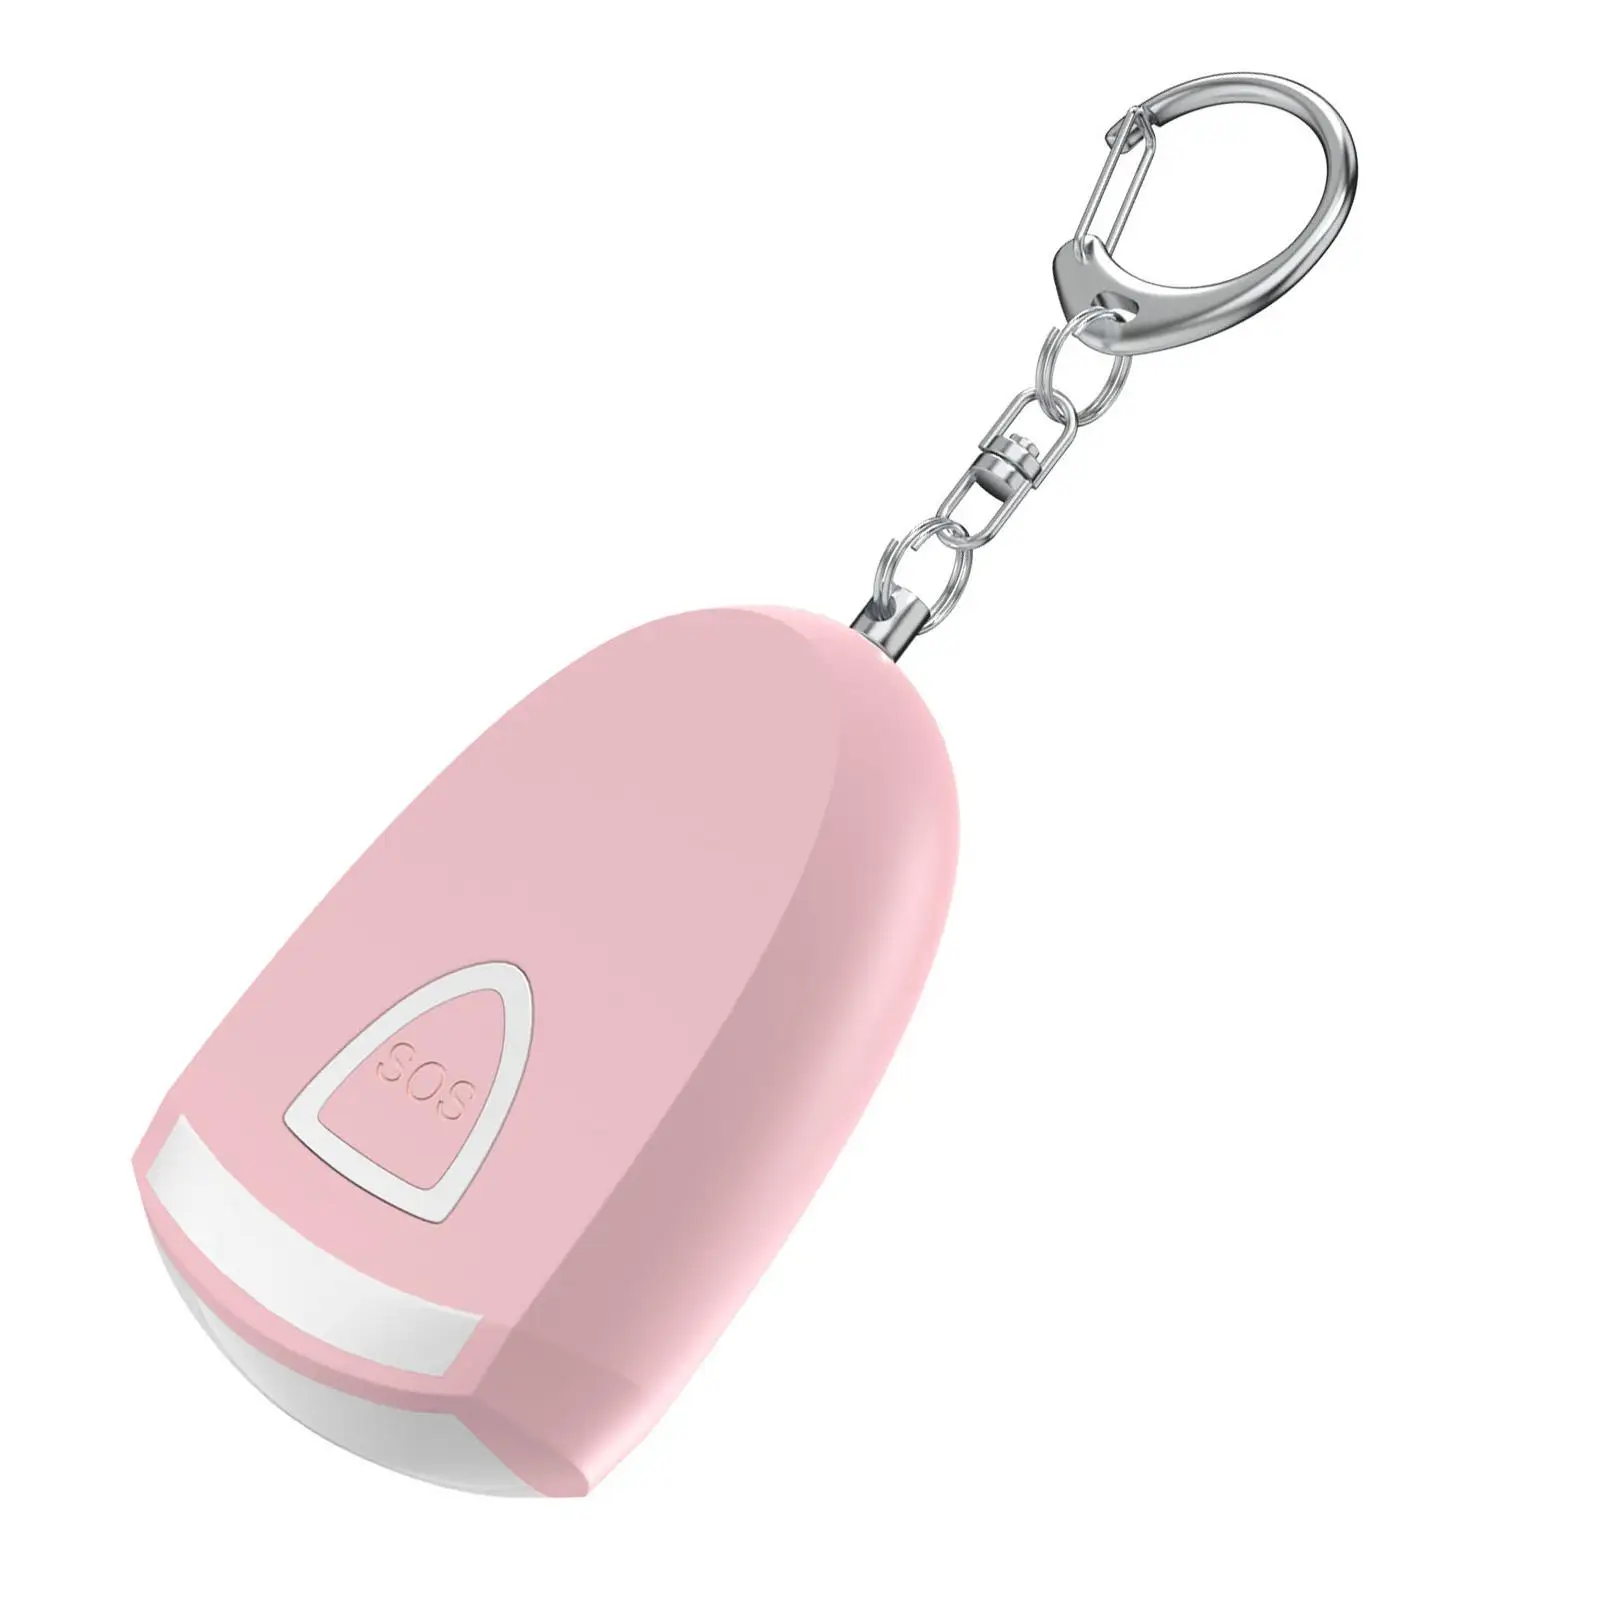 Security Personal Alarm Keychain with Emergency LED Flashlight Protection Devices Personal Alarm Keychain for Elderly Women Kids